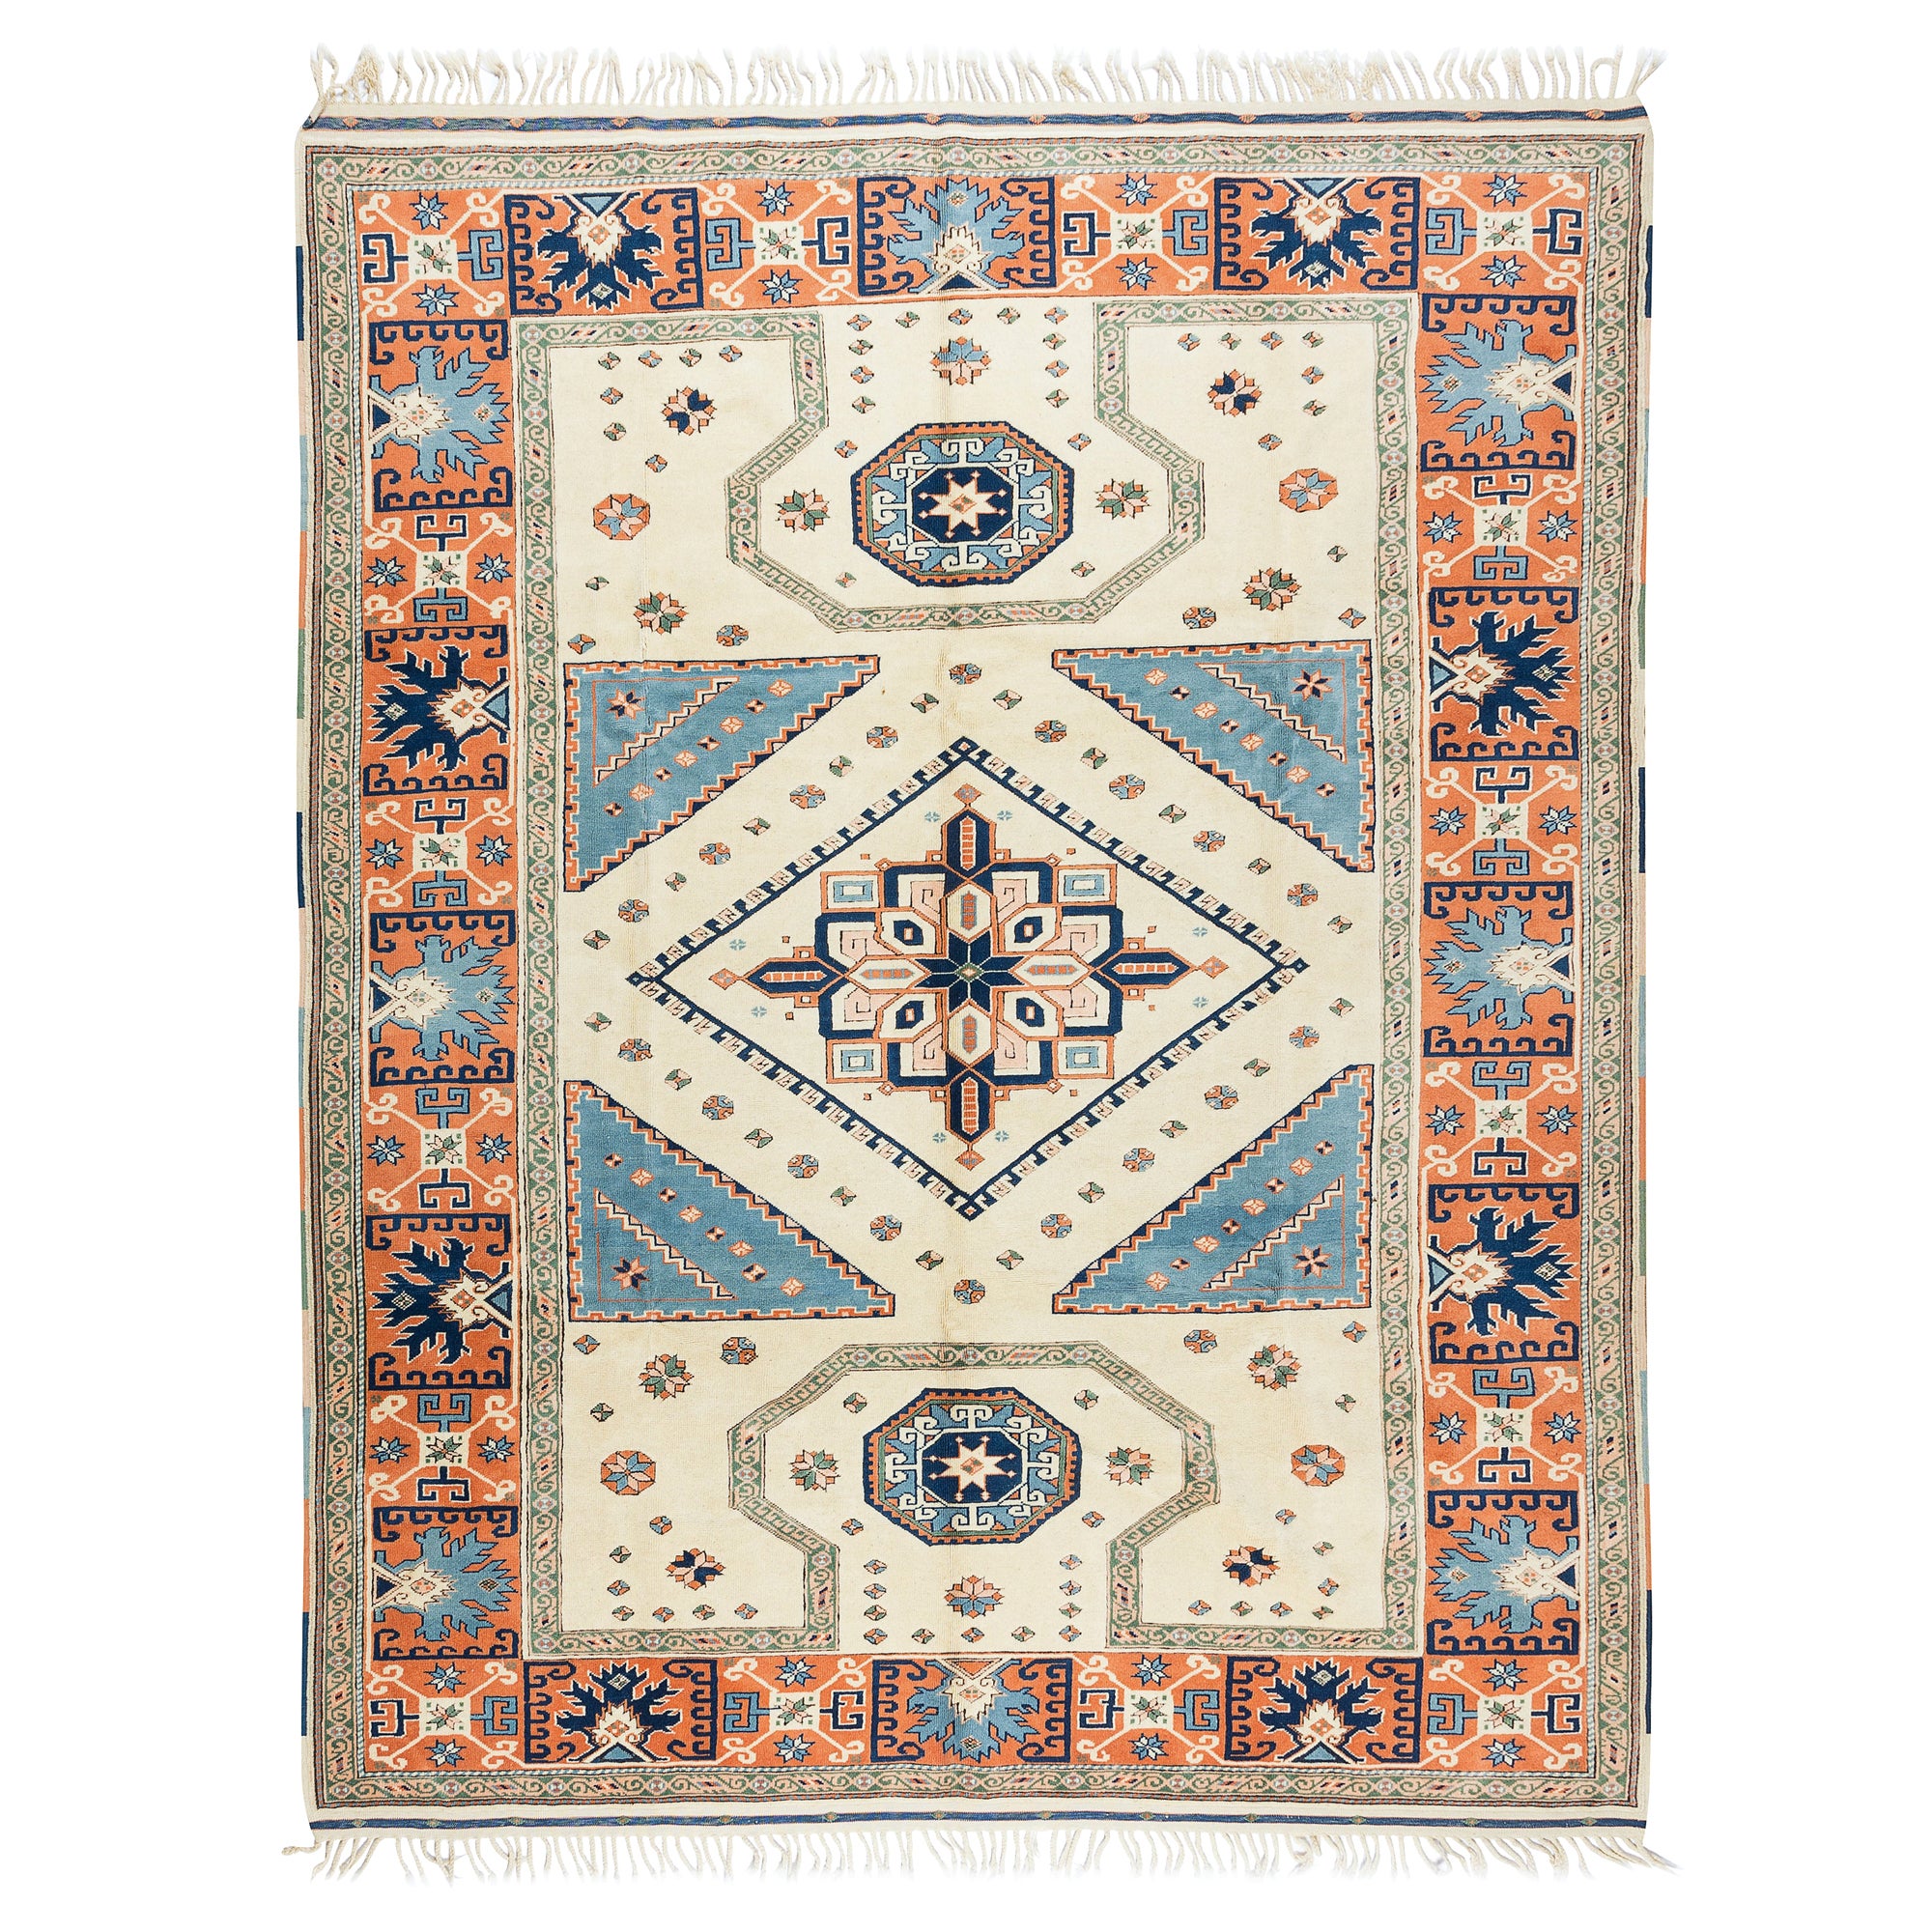 8x10 Ft Modern Handknotted Turkish Area Rug, Handmade Geometric Carpet, All Wool For Sale